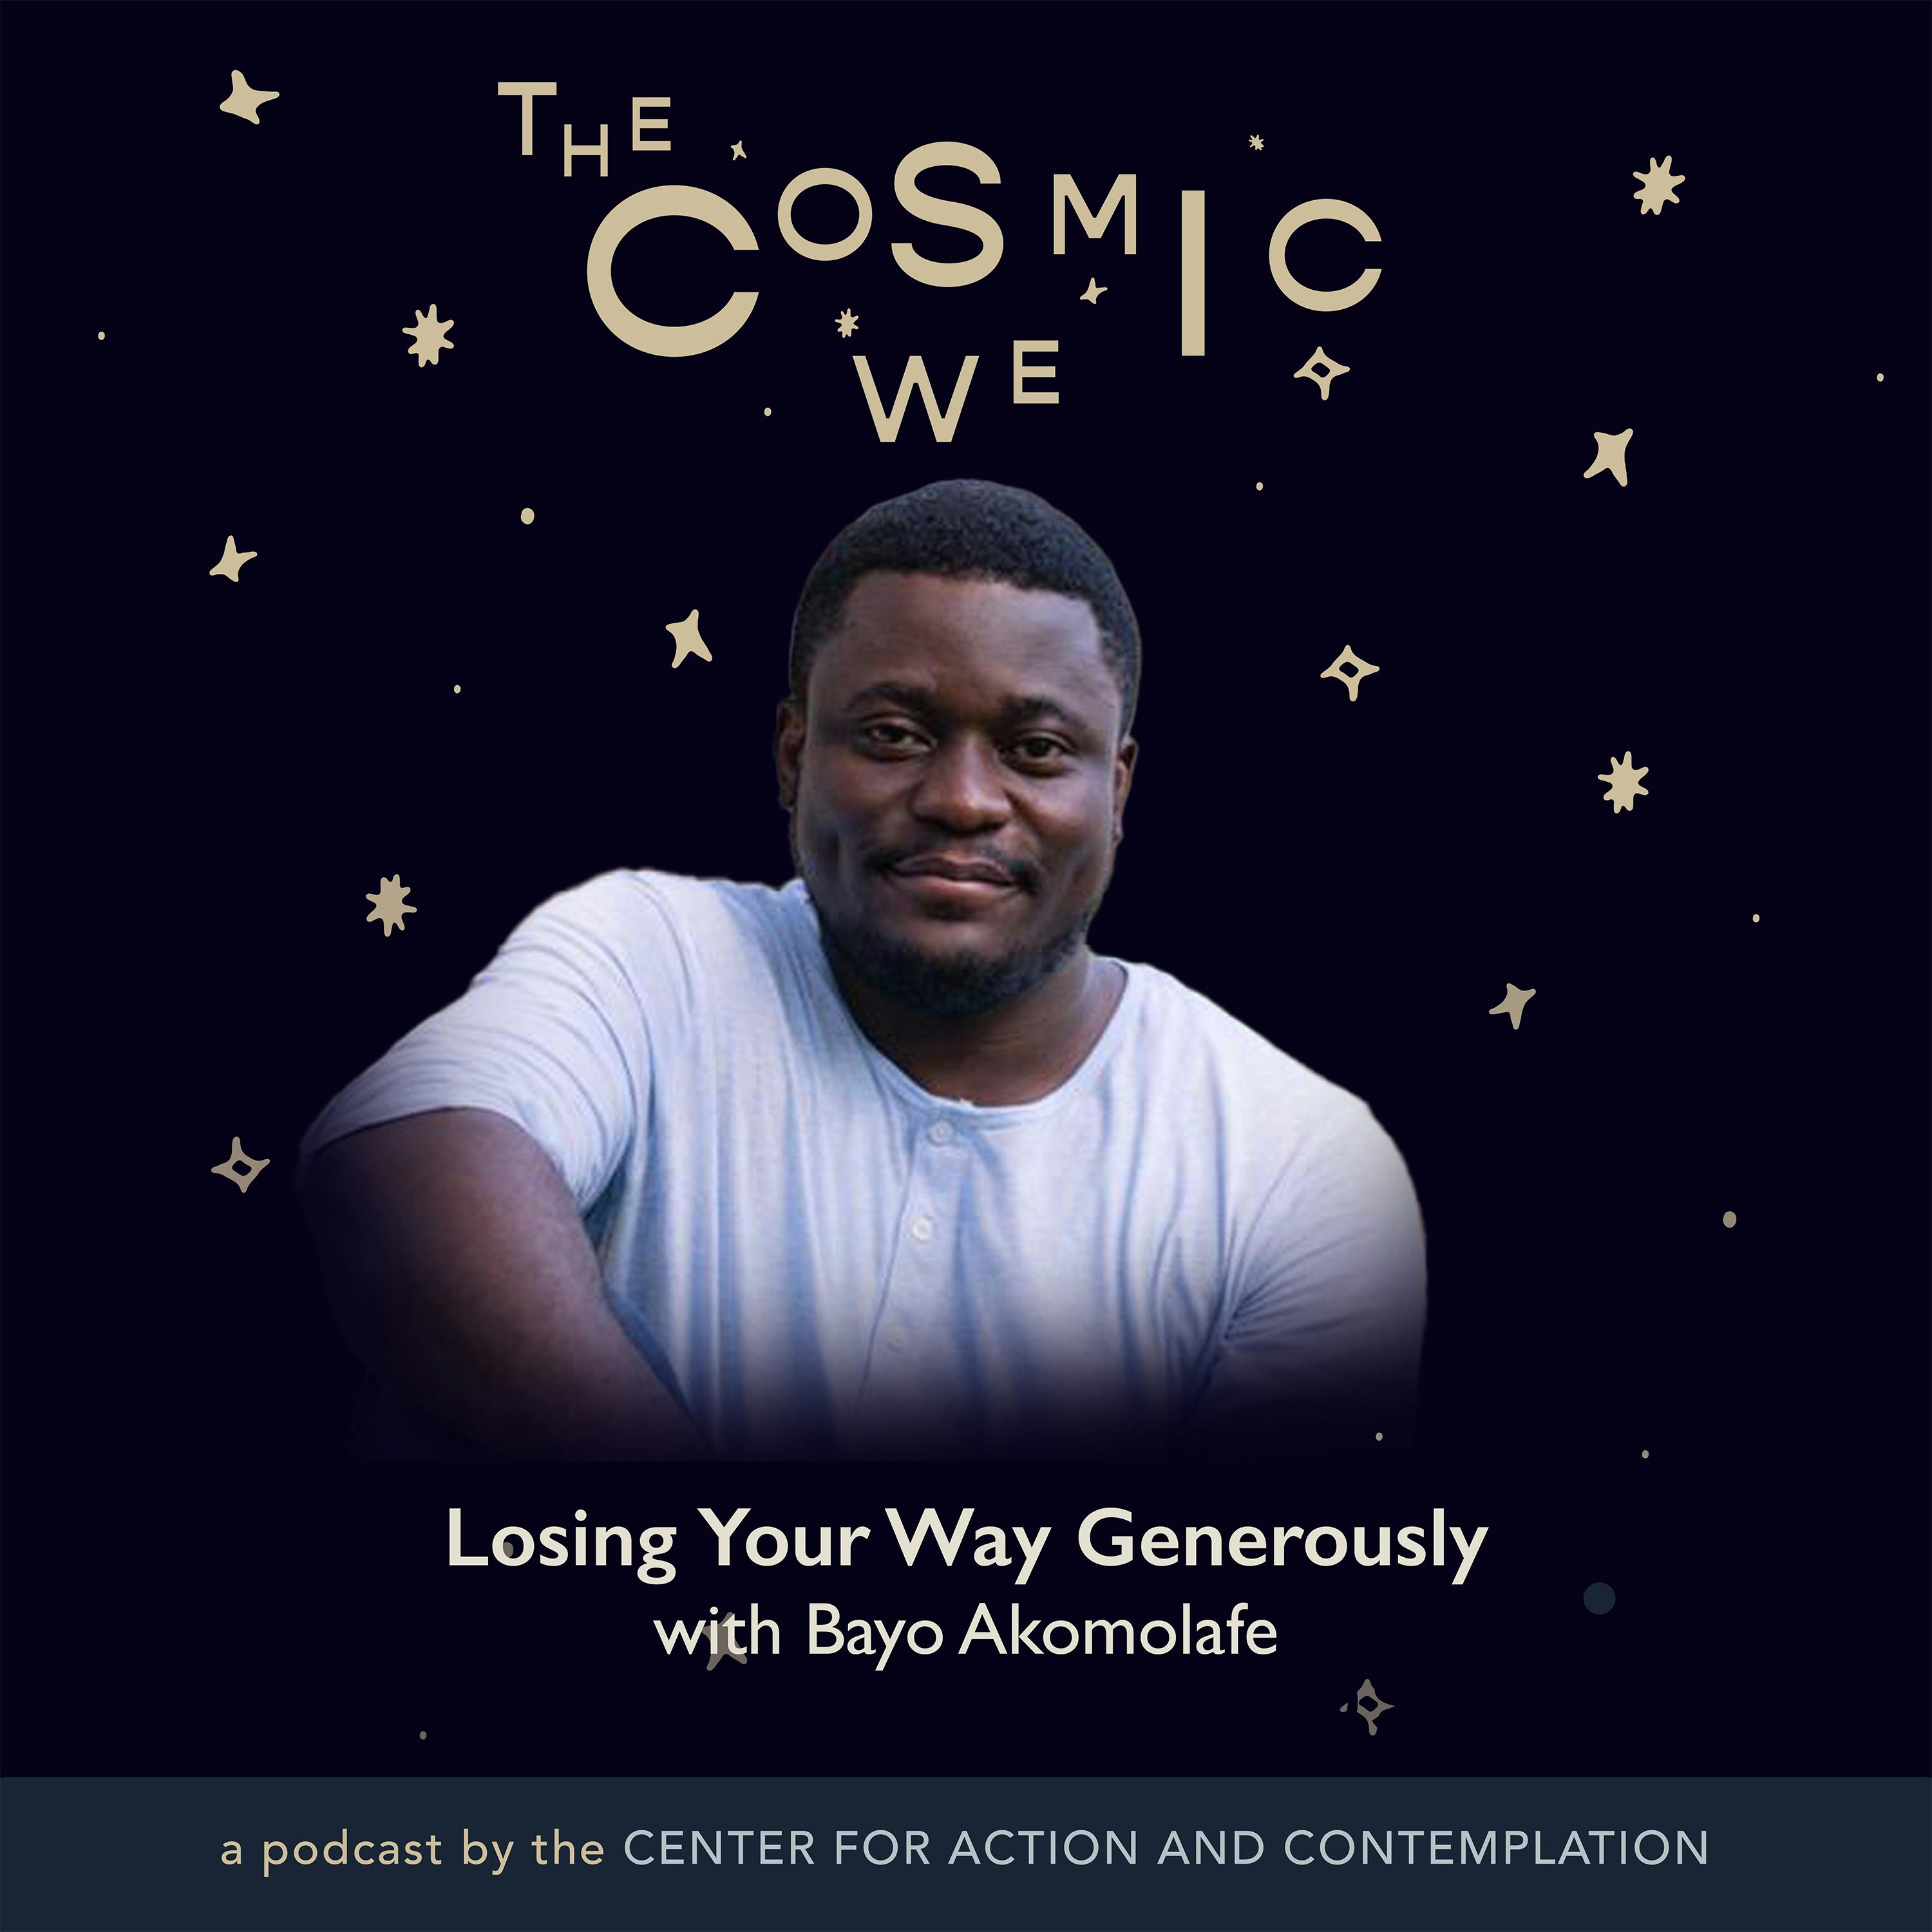 Losing Your Way Generously with Bayo Akomolafe